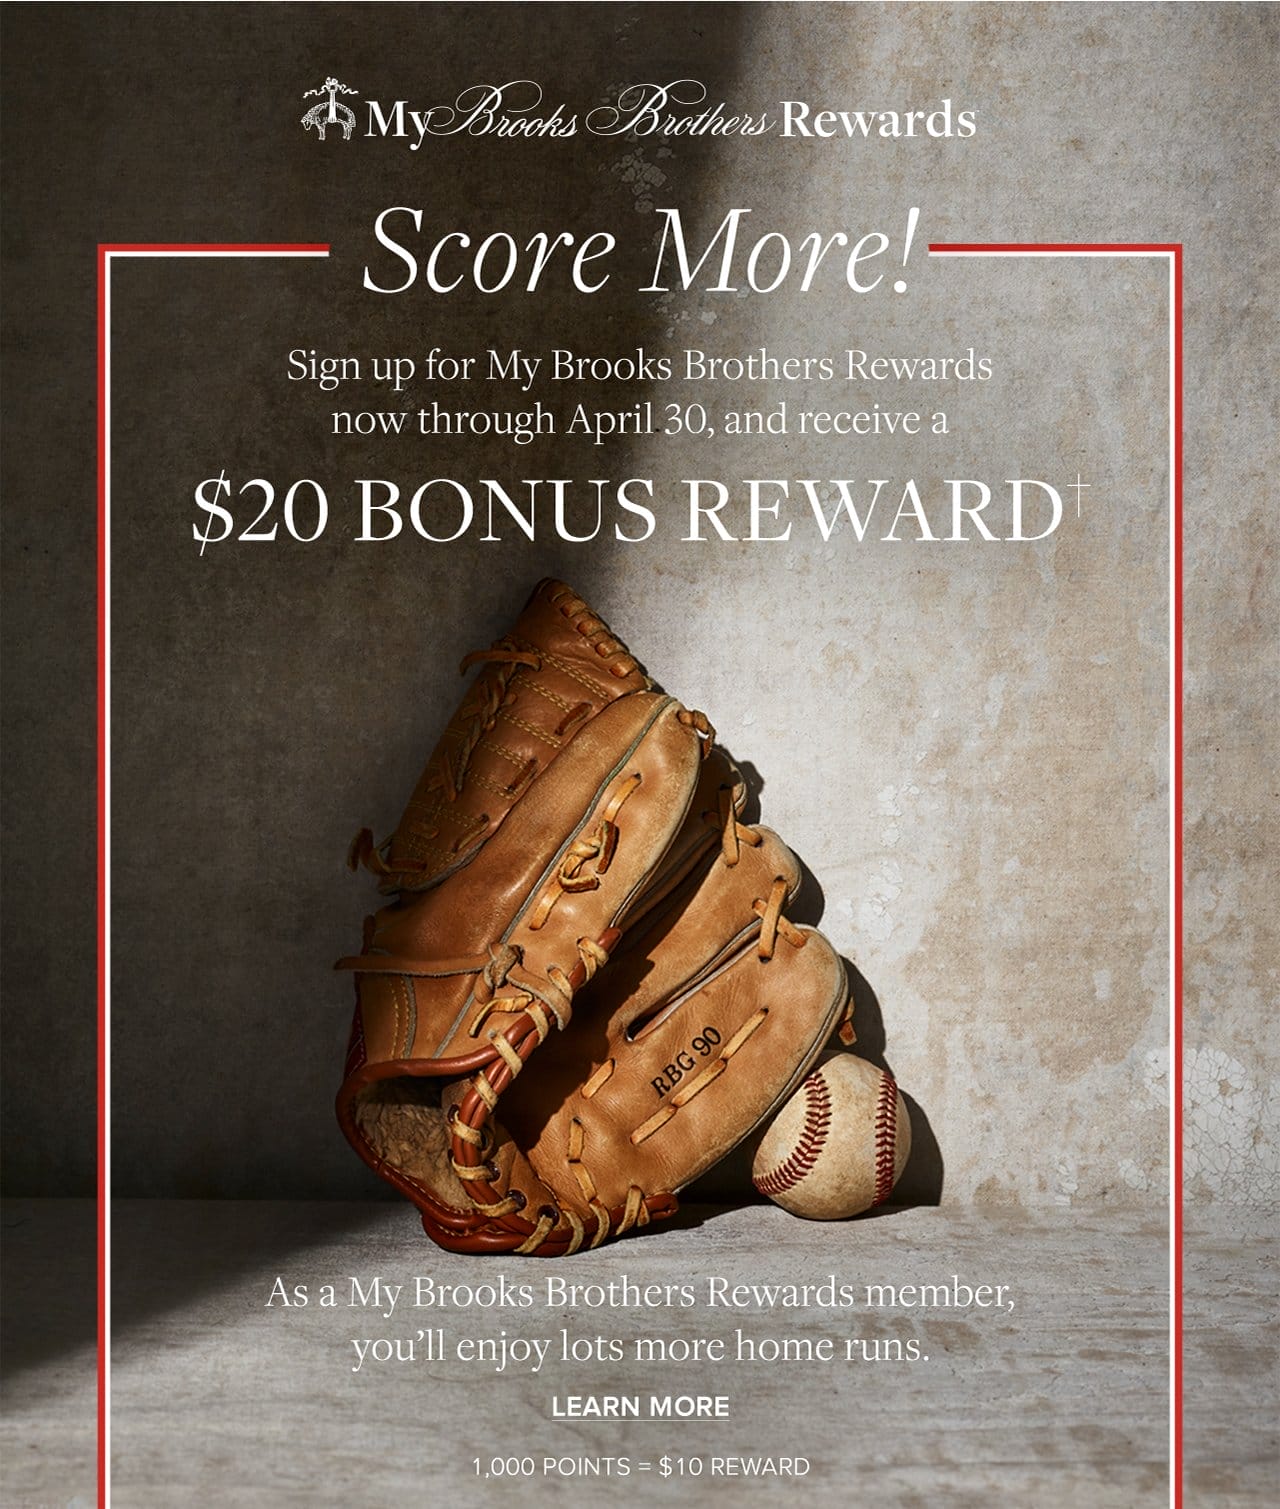 My Brooks Brothers Rewards. Score More! Sign up for My Brooks Brothers Rewards now through April 30, and receive a \\$20 Bonus Reward. As a My Brooks Brothers Rewards member, you'll enjoy lots more home runs. Learn More